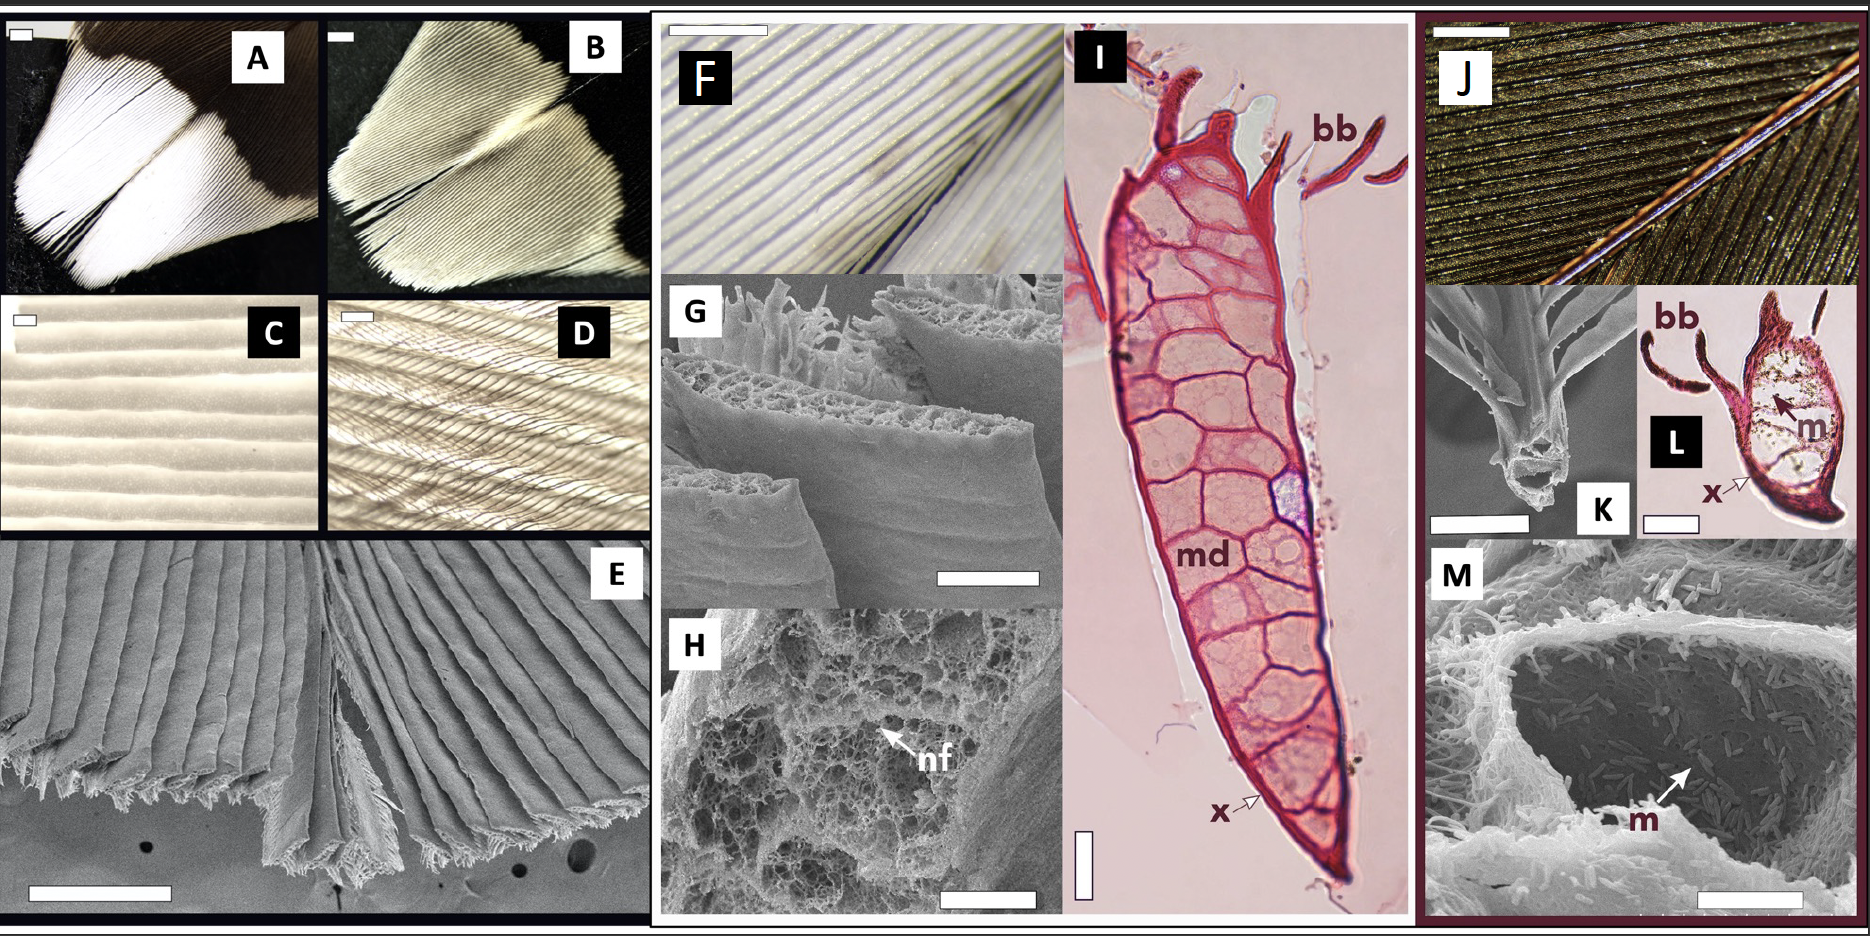 (a)–(e): Morphology of the white tips of woodcock Scolopax rusticola rectrices. (a) White reverse surface. (b) Brown obverse surface. (c) White rami in a Venetian-blind alignment; individual cells are apparent. (d) Obverse view showing the interlocked dark barbules covering the white rami. (e) SEM micrograph of the white rectrix tip transversally cut, showing shallow V-shaped surface of rami; (f)–(m): Comparison of the microstructure of the white and brown parts of rectrices. (f) Optical image of white rami at 30x magnification. (g) Thickened and flattened rami viewed from the reverse surface. (h) Interior of a white ramus shows cells with networks of keratin fibres (nf) and air pockets. (i) a white ramus showing hollow medullary cells (md) and a thin cortex (x); the barbules (bb) are present on the obverse side. (j) Optical image of contiguous brown region at 30x magnification. (k) Brown rami in cross-section. (l) Melanosomes (m) present throughout the rami and barbules. (m) Medullary cell of brown ramus showing melanosomes (m) and the absence of keratin matrices. Scale bars: (a) and (b) 1 mm; (c), (d), (g) and (k) 50 μm; (e) 500 μm; (h) 10 μm; (i) and (l) 100 μm; (m) 5 μm; (f) and (j) 1 mm.(Reporduced from Dunning et al. 2023)